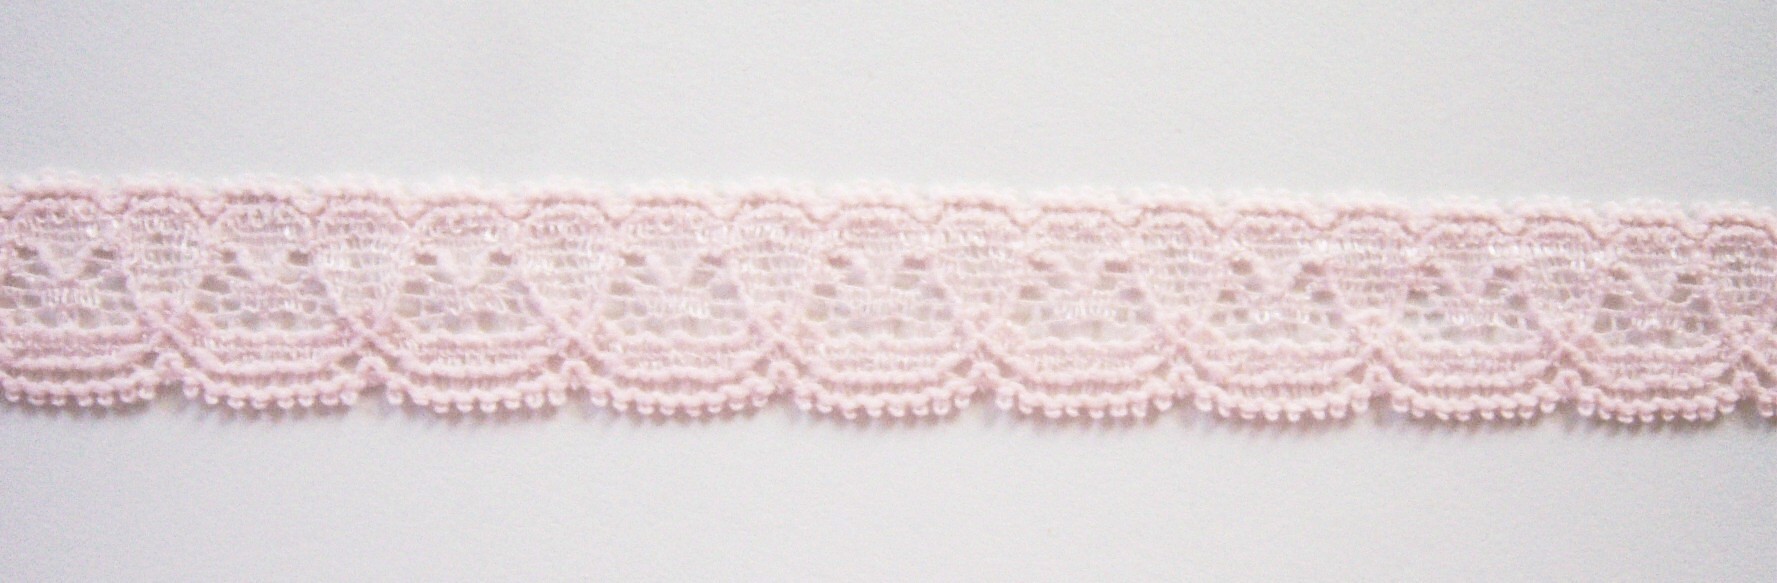 S.S. Pink 5/8" Stretch Lace